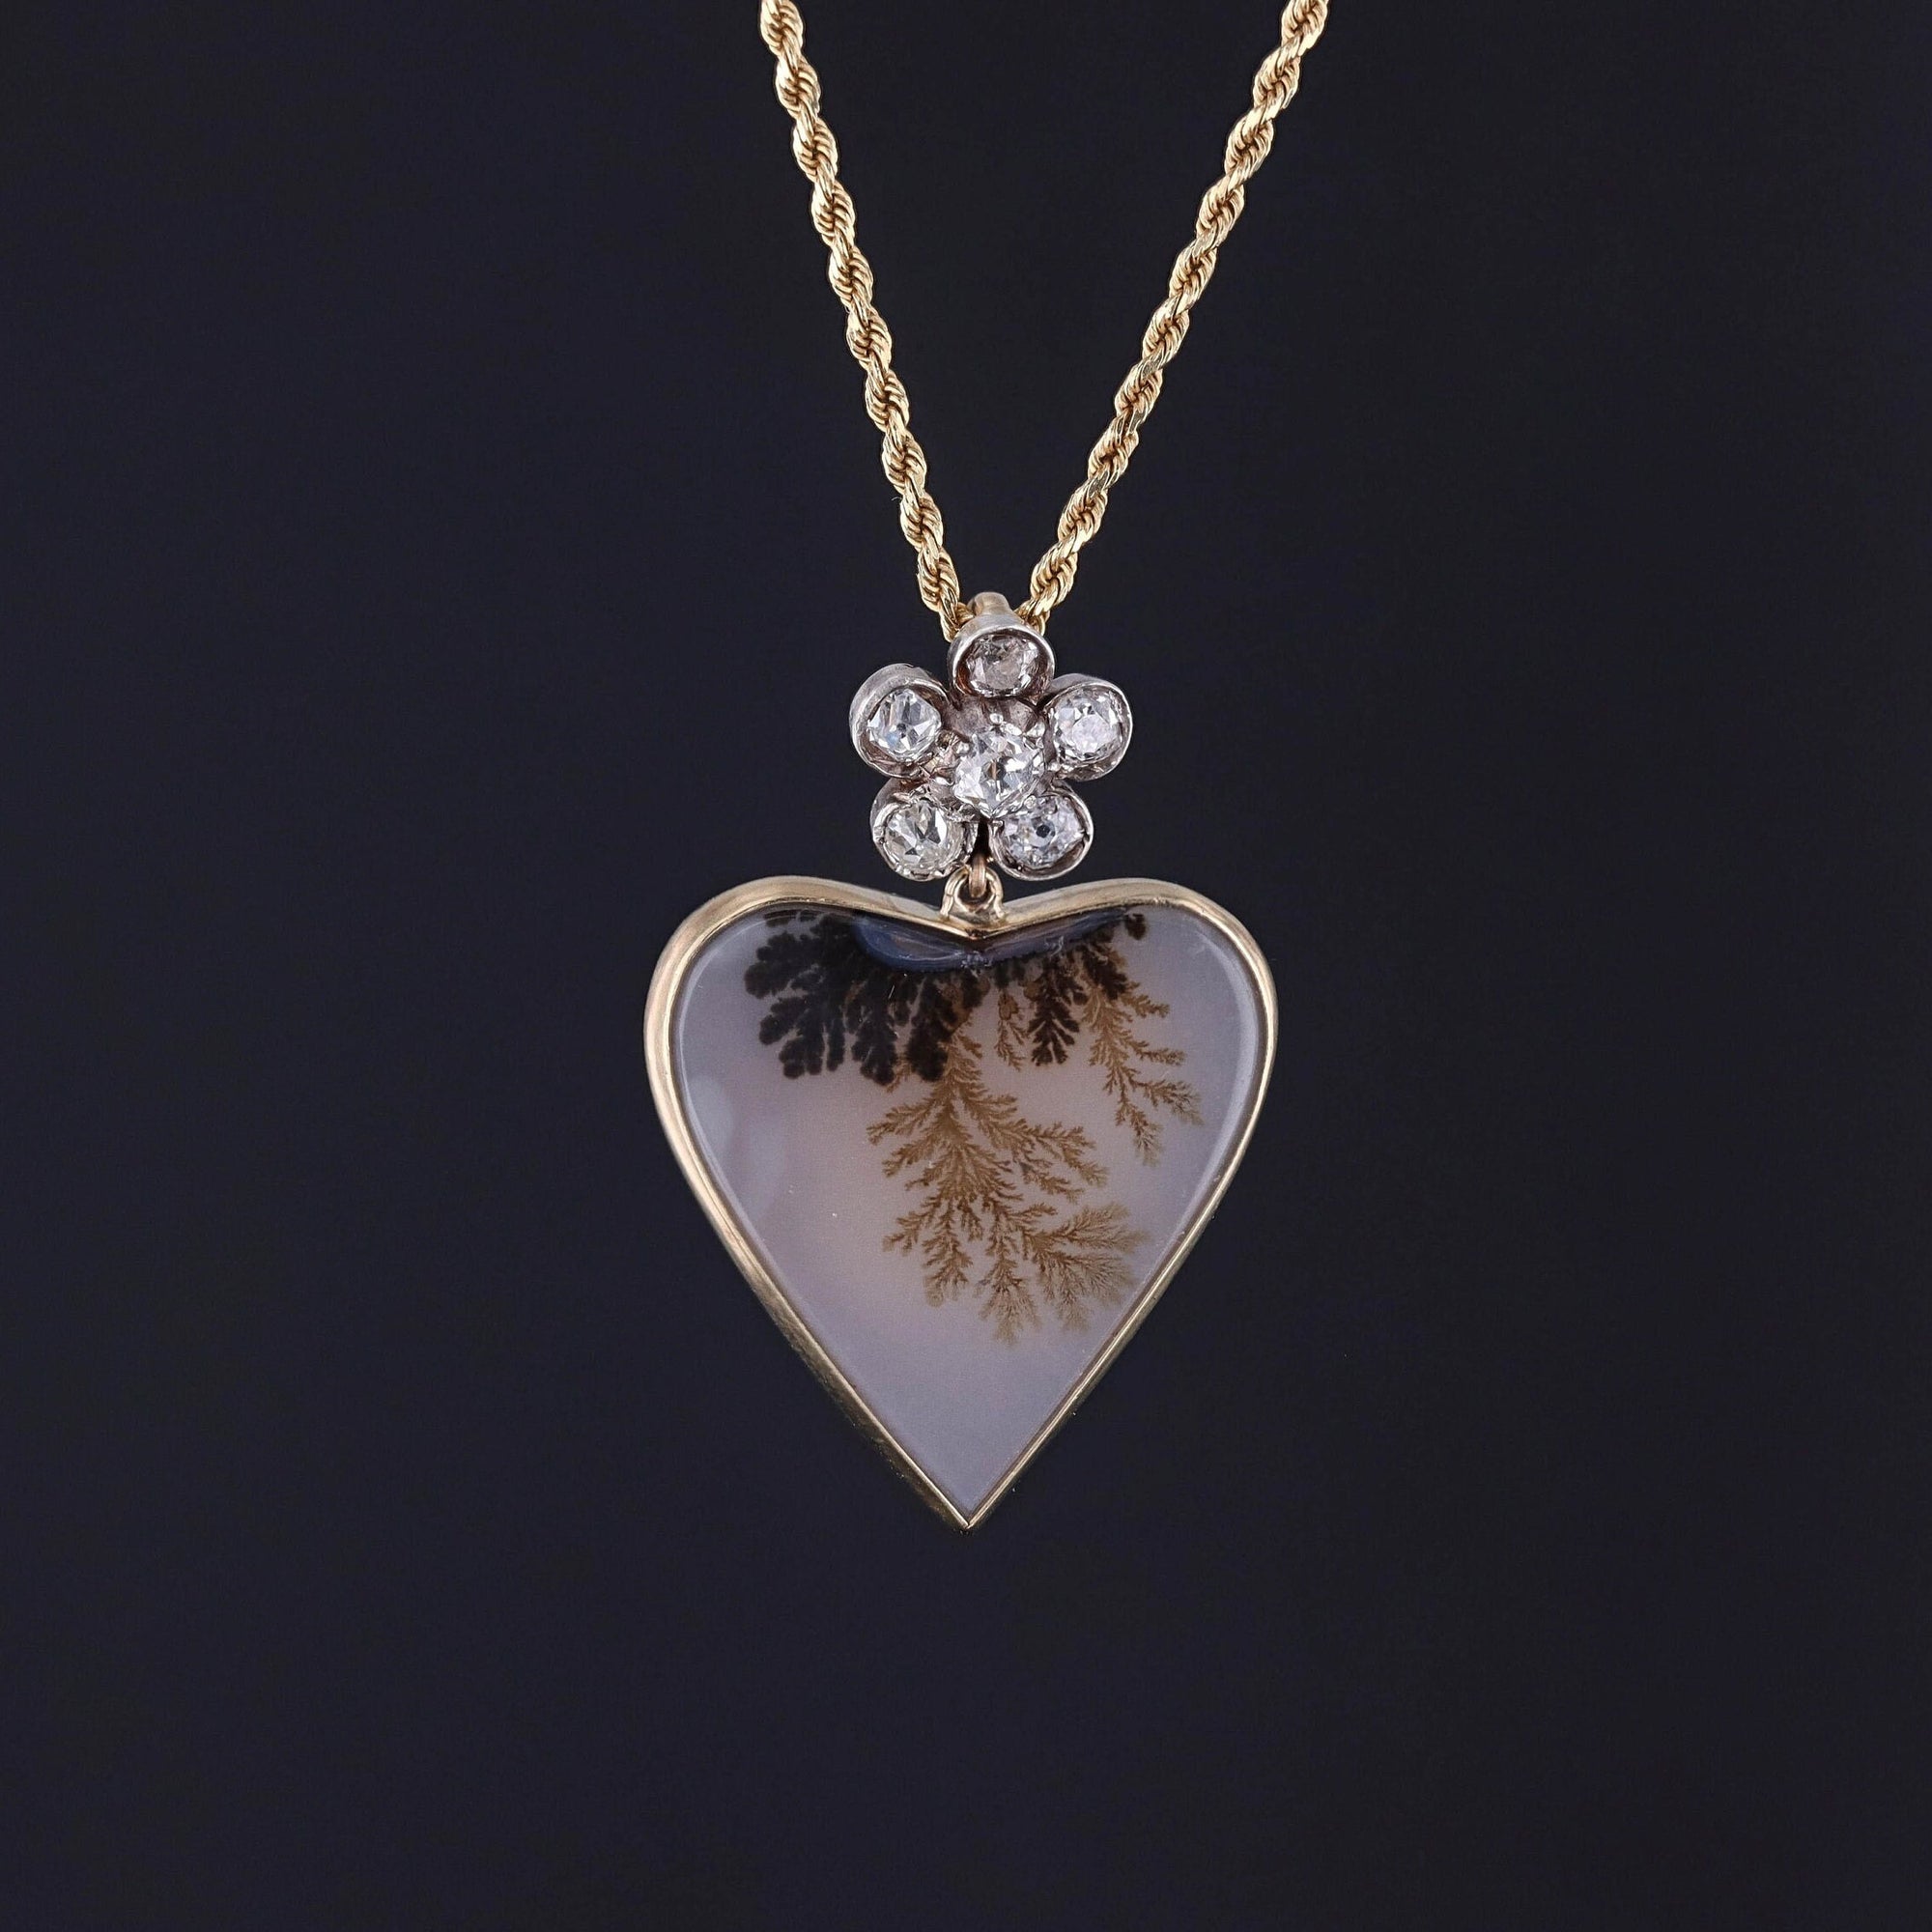 Dendritic Agate and Diamond Pendant of 14k Gold